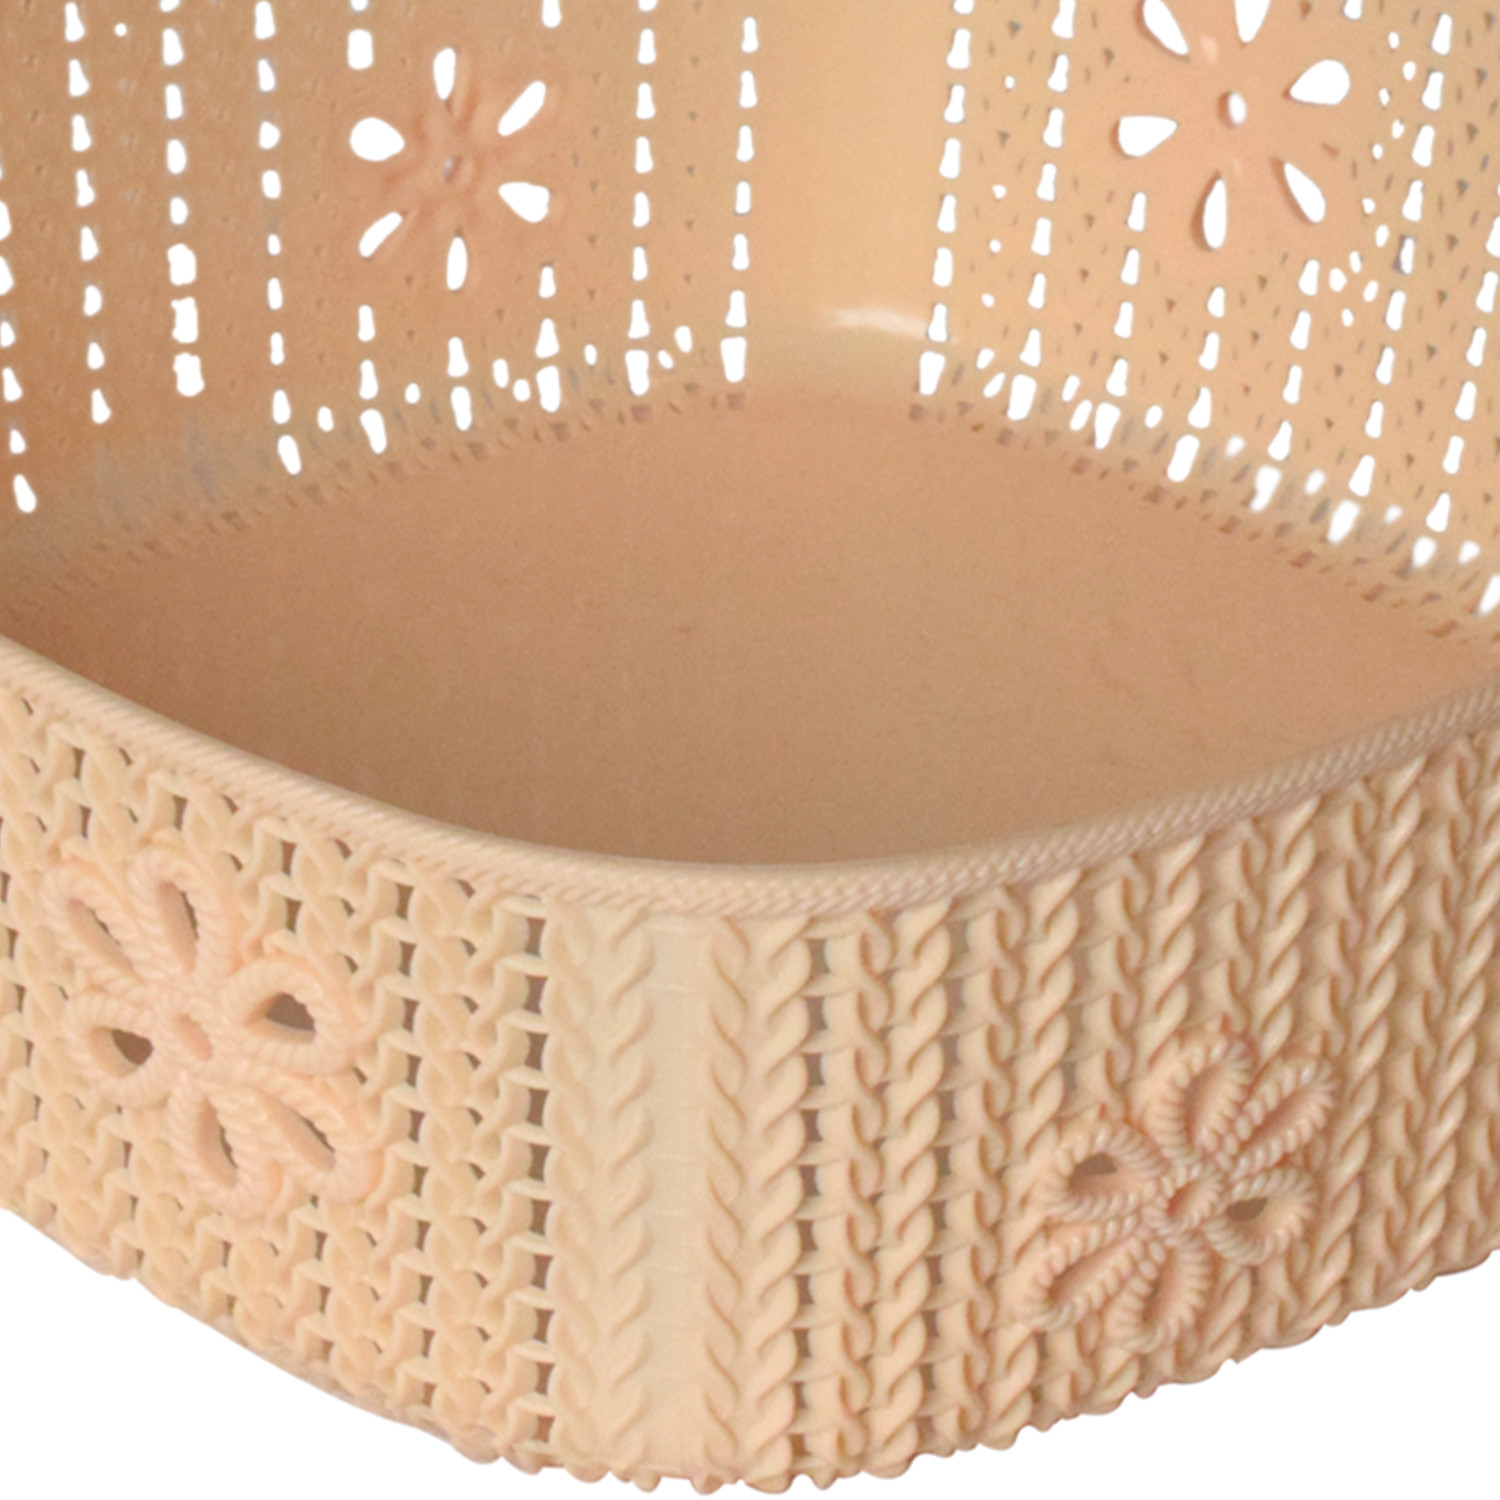 Kuber Industries Woven Design Multipurpose Square Shape Basket Ideal for Friuts, Vegetable, Toys Small, Medium, Large Pack of 3 (Beige)